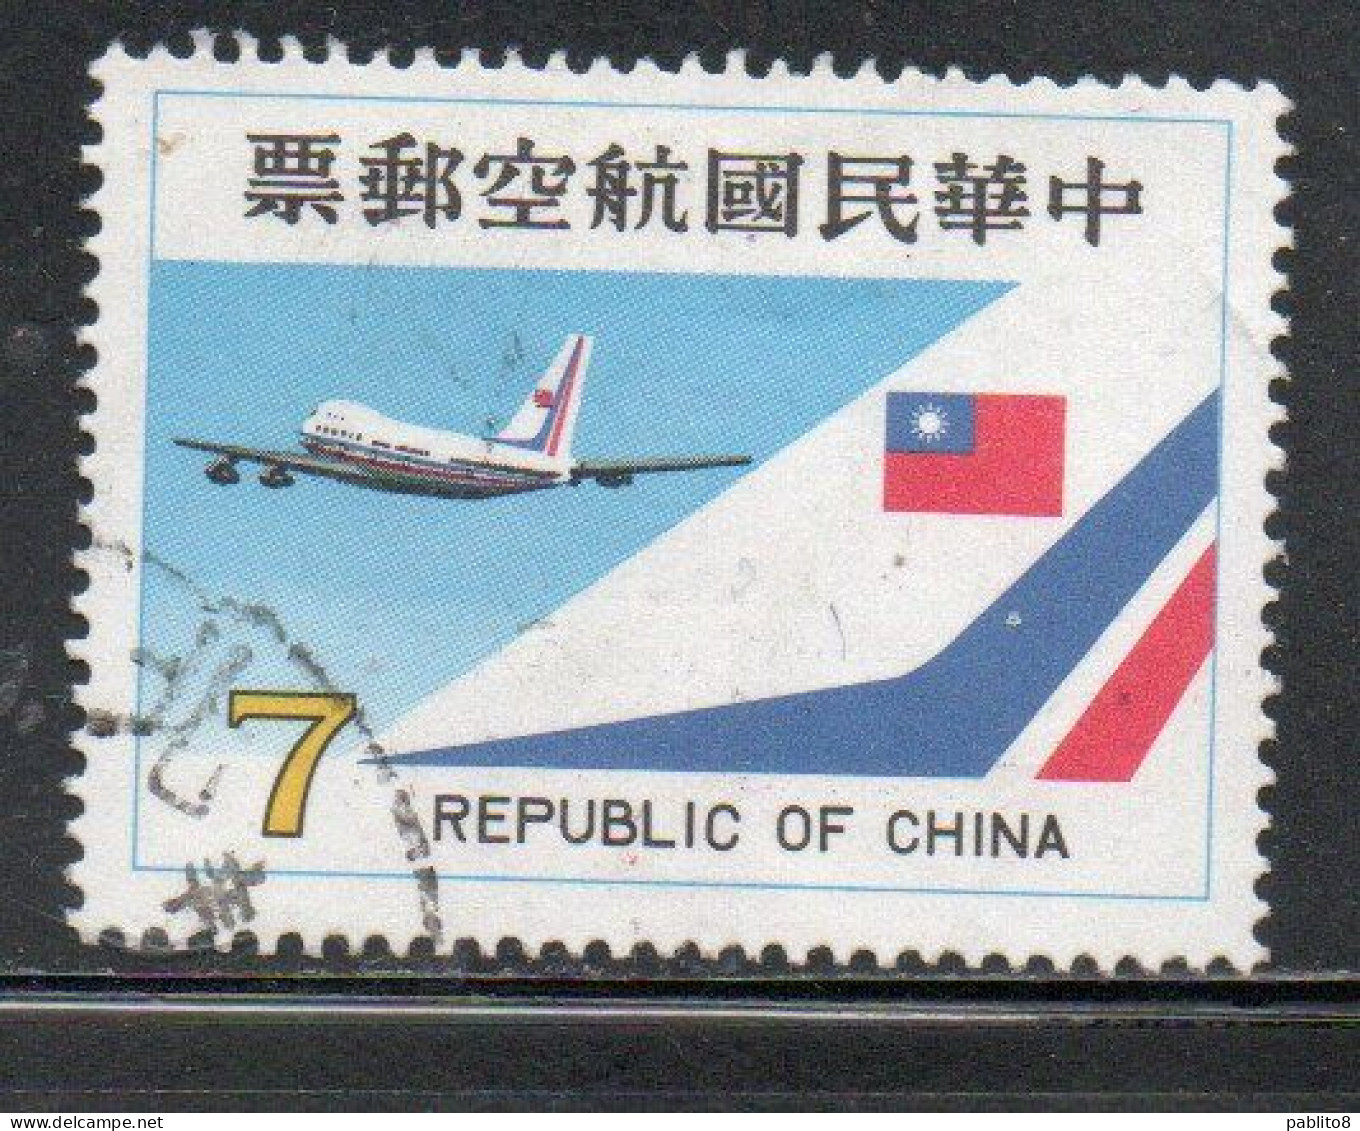 CHINA REPUBLIC CINA TAIWAN FORMOSA 1980 AIR POST MAIL AIRMAIL CHINA AIRLINES JET 7$ USED USATO OBLITERE' - Luftpost